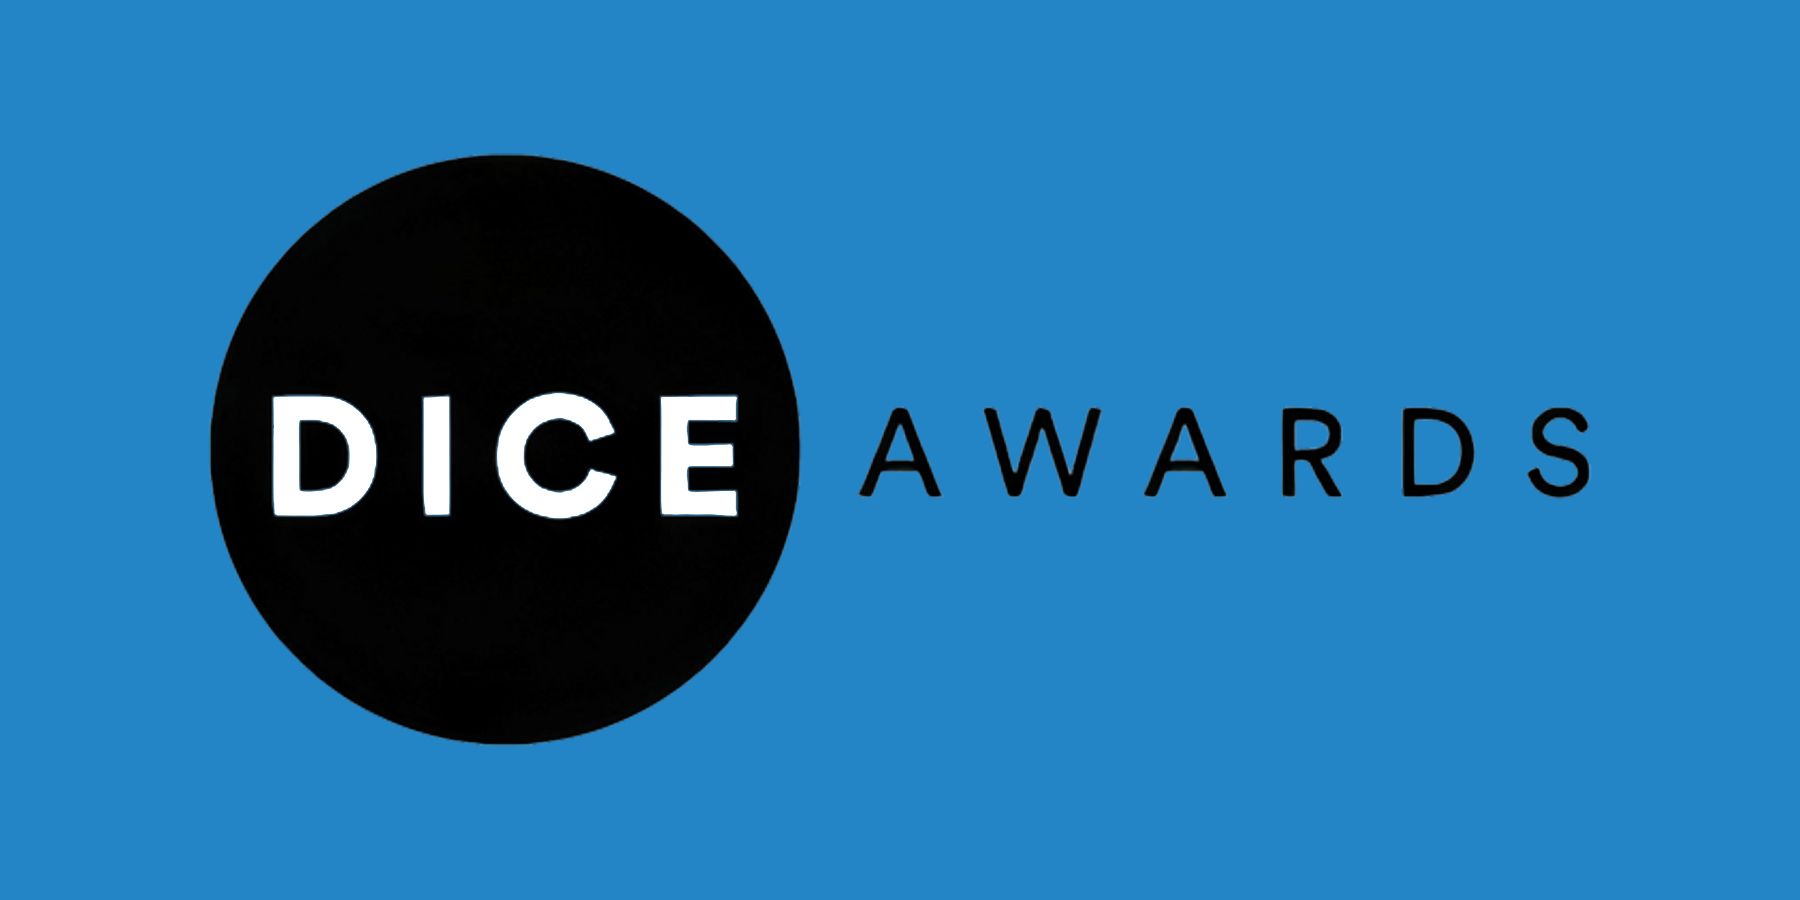 DICE Awards Announces Nominees for 2023 Event